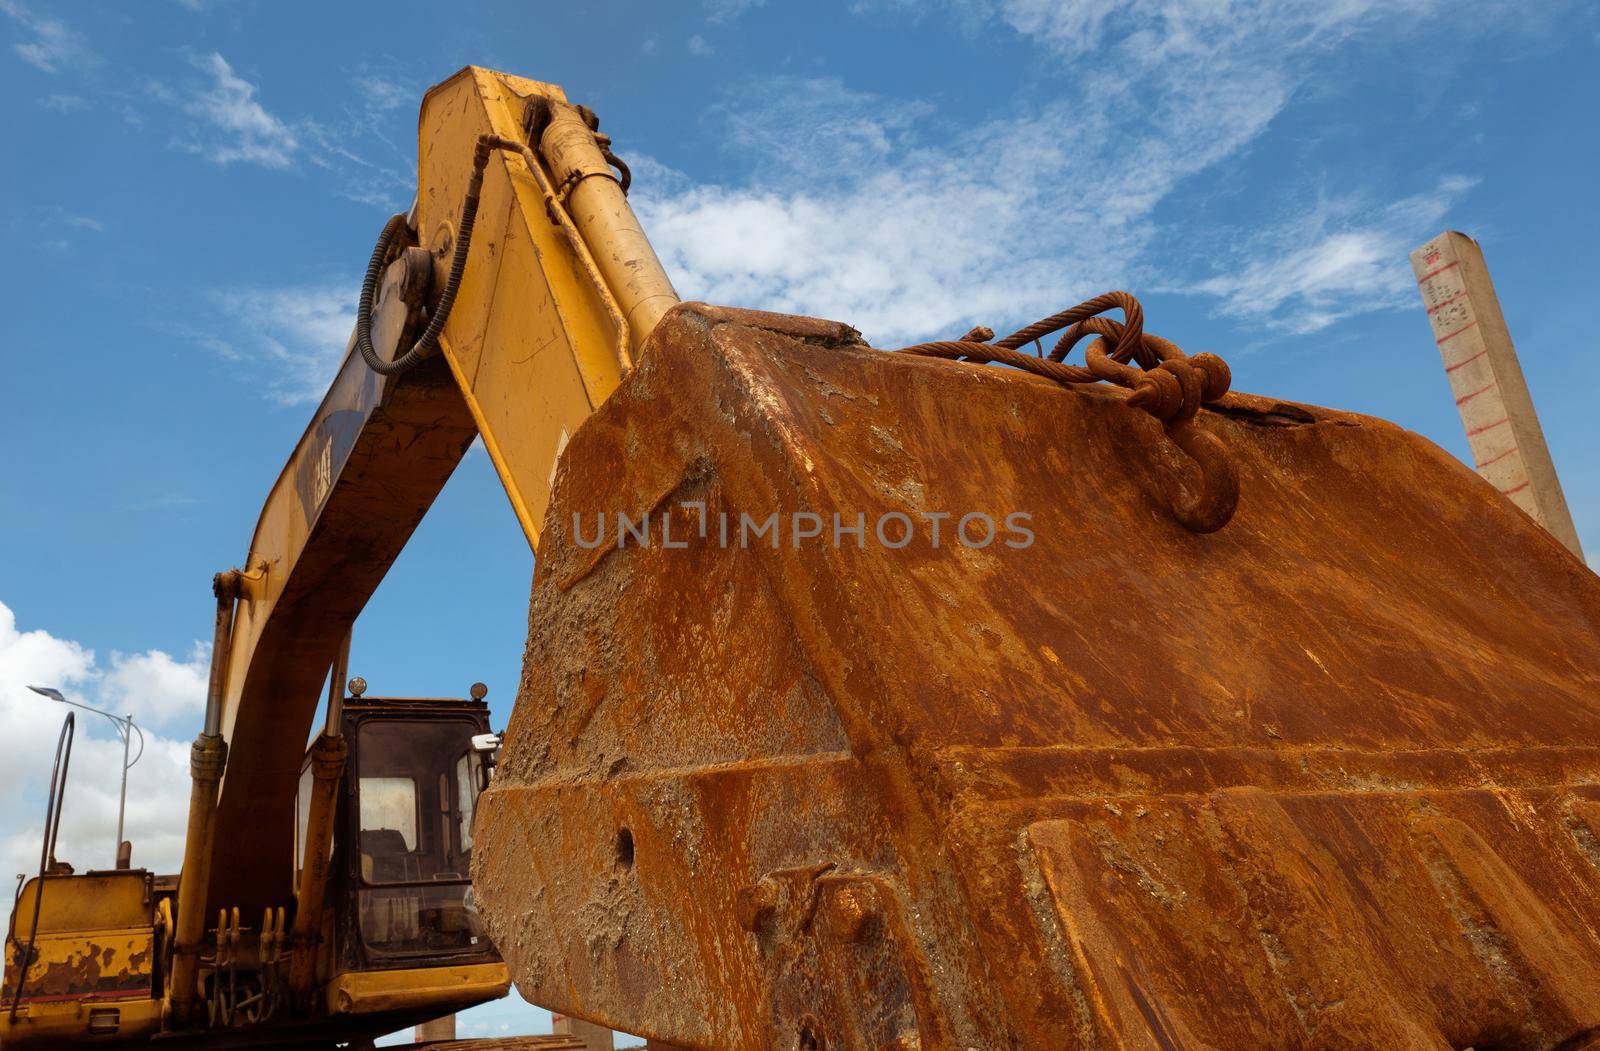 Closeup rusty metal bucket of old backhoe parked at construction site against blue sky. Excavating machine. Earth moving machine. Excavation vehicle. Dirt bucket of old digger. Construction industry.